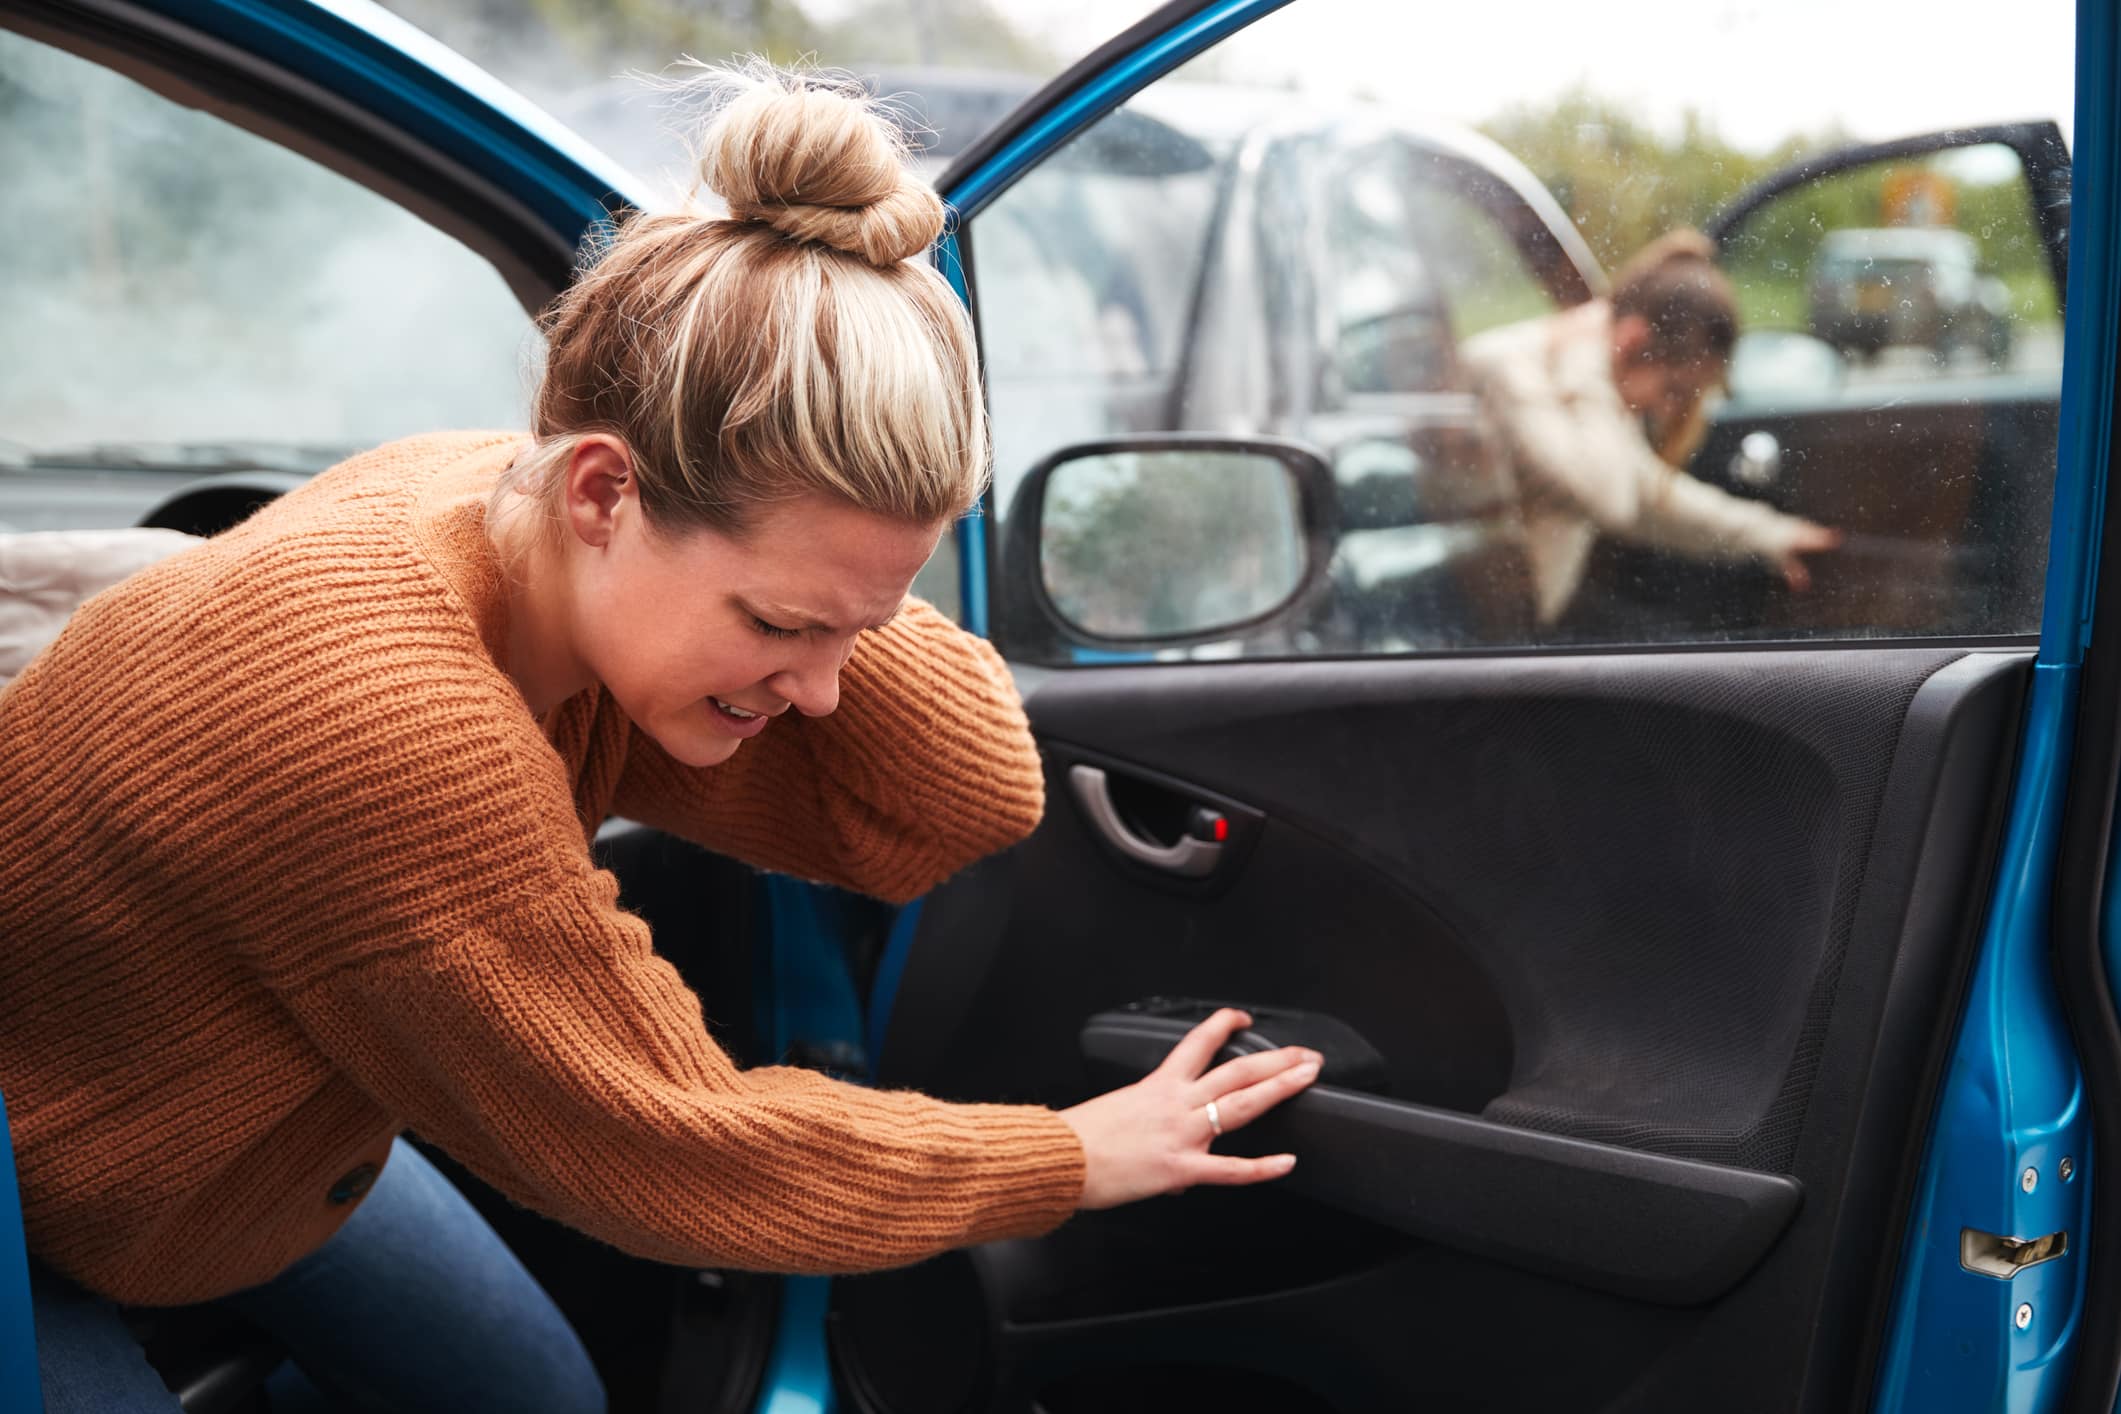 A woman holding her neck in pain as she gets out of her car after a car accident.